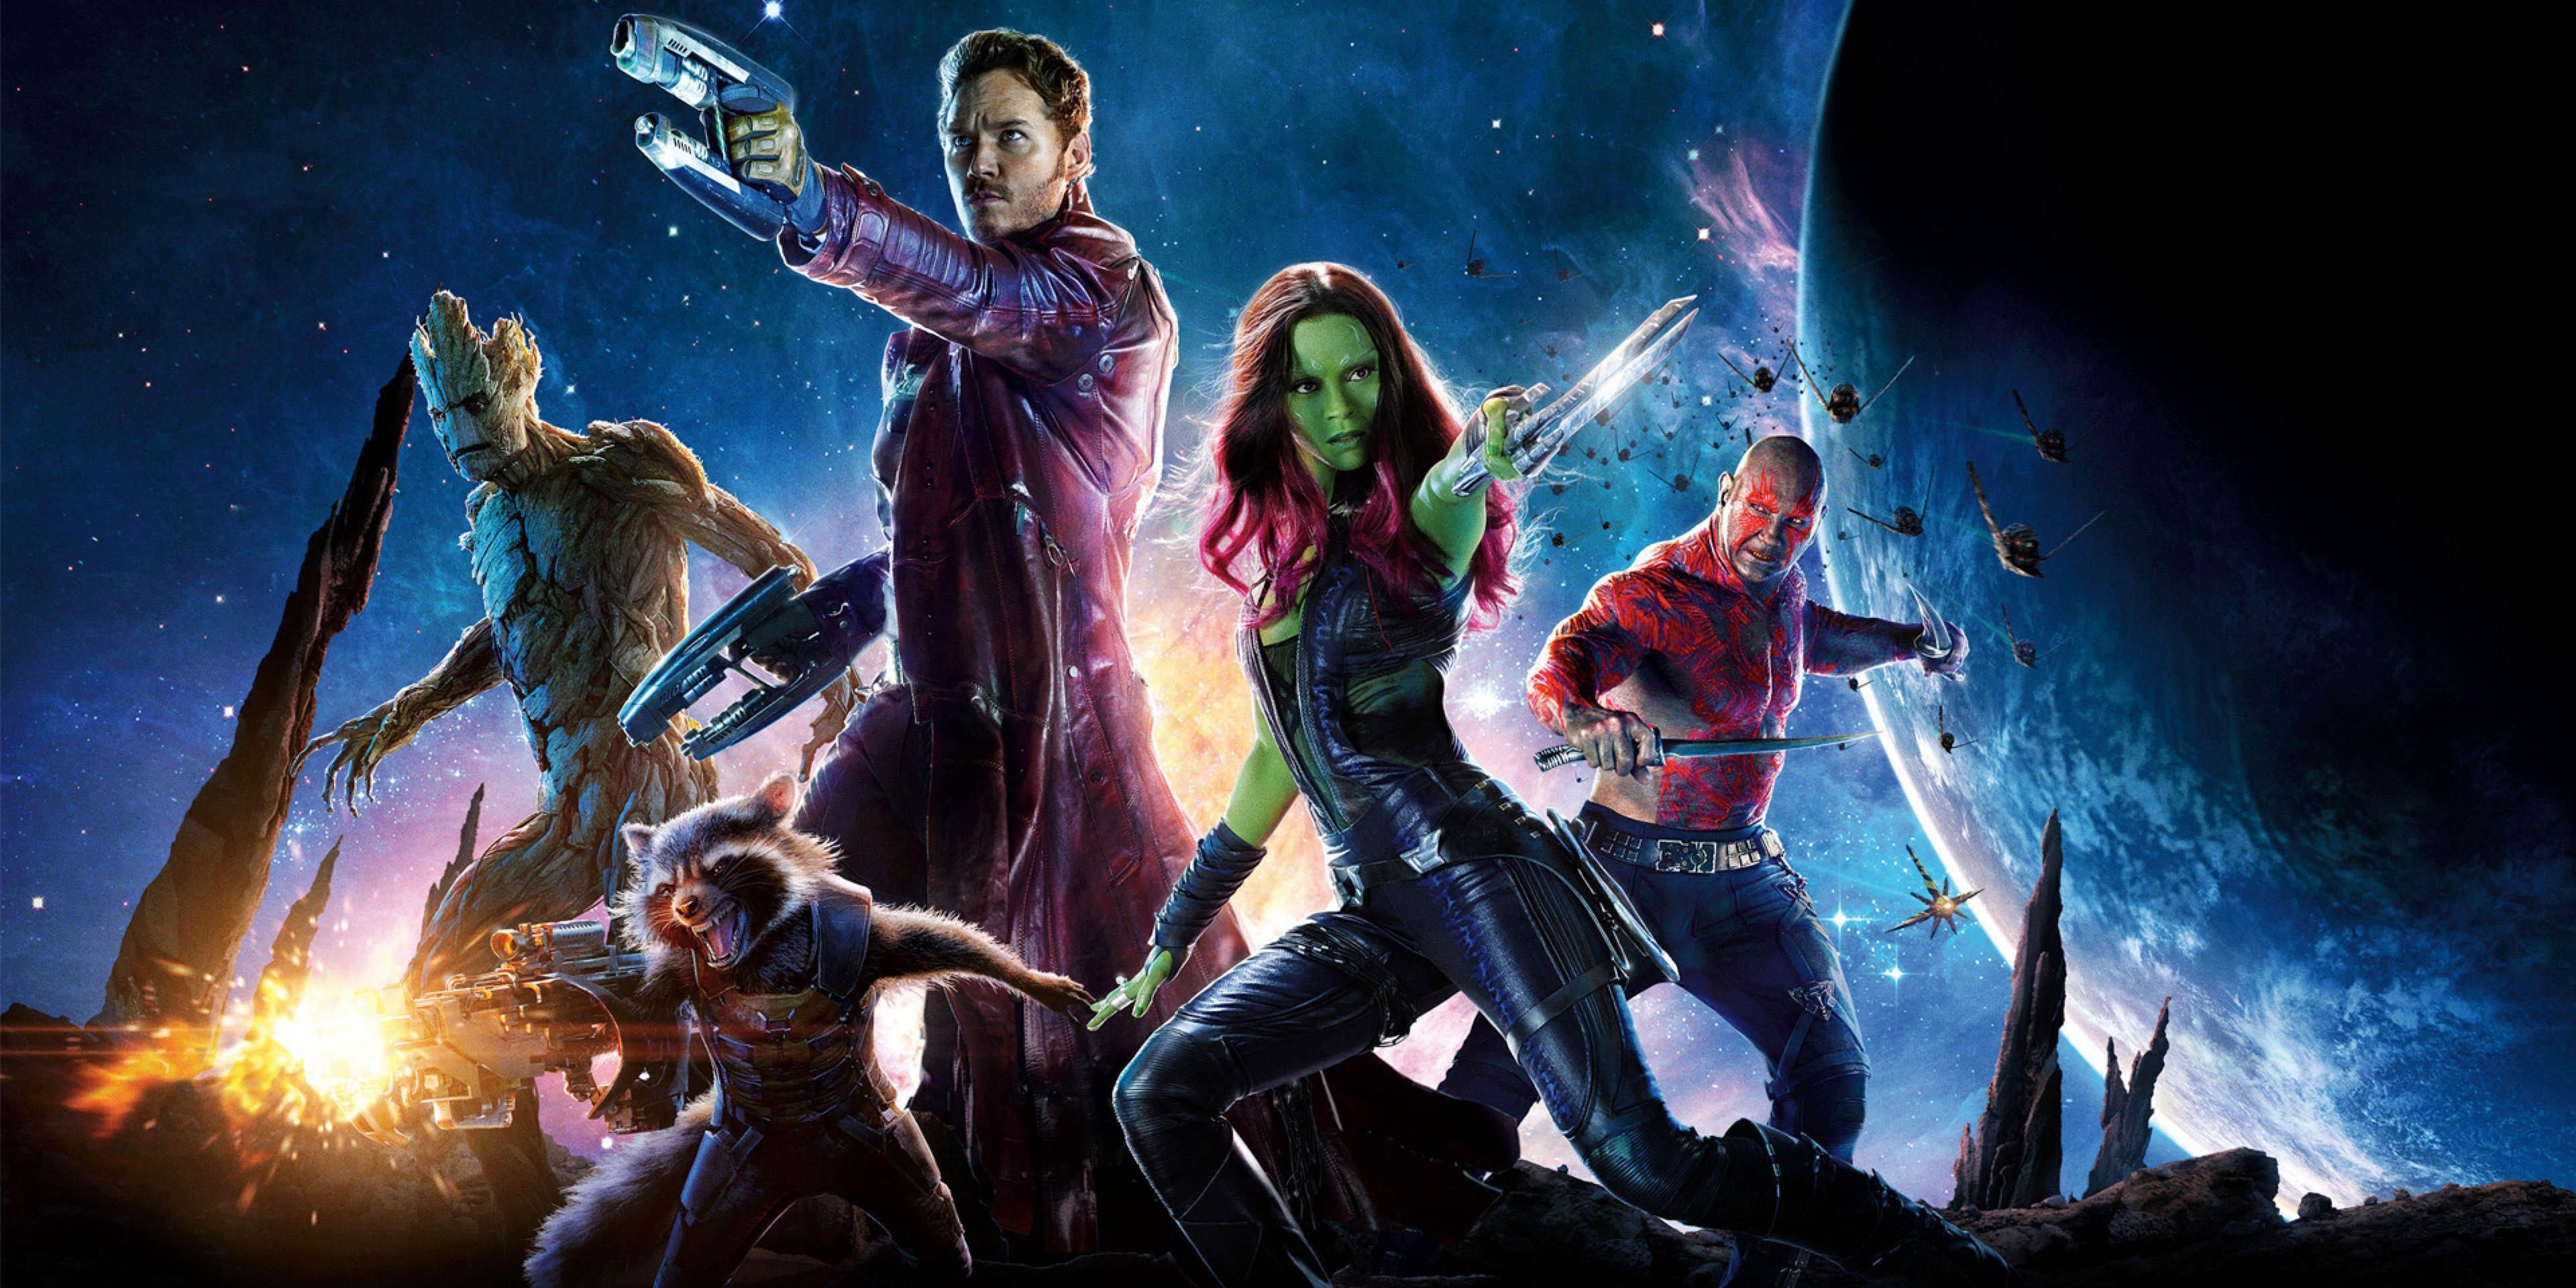 Guardians Of The Galaxy Could Be Marvel’s First Real Trilogy